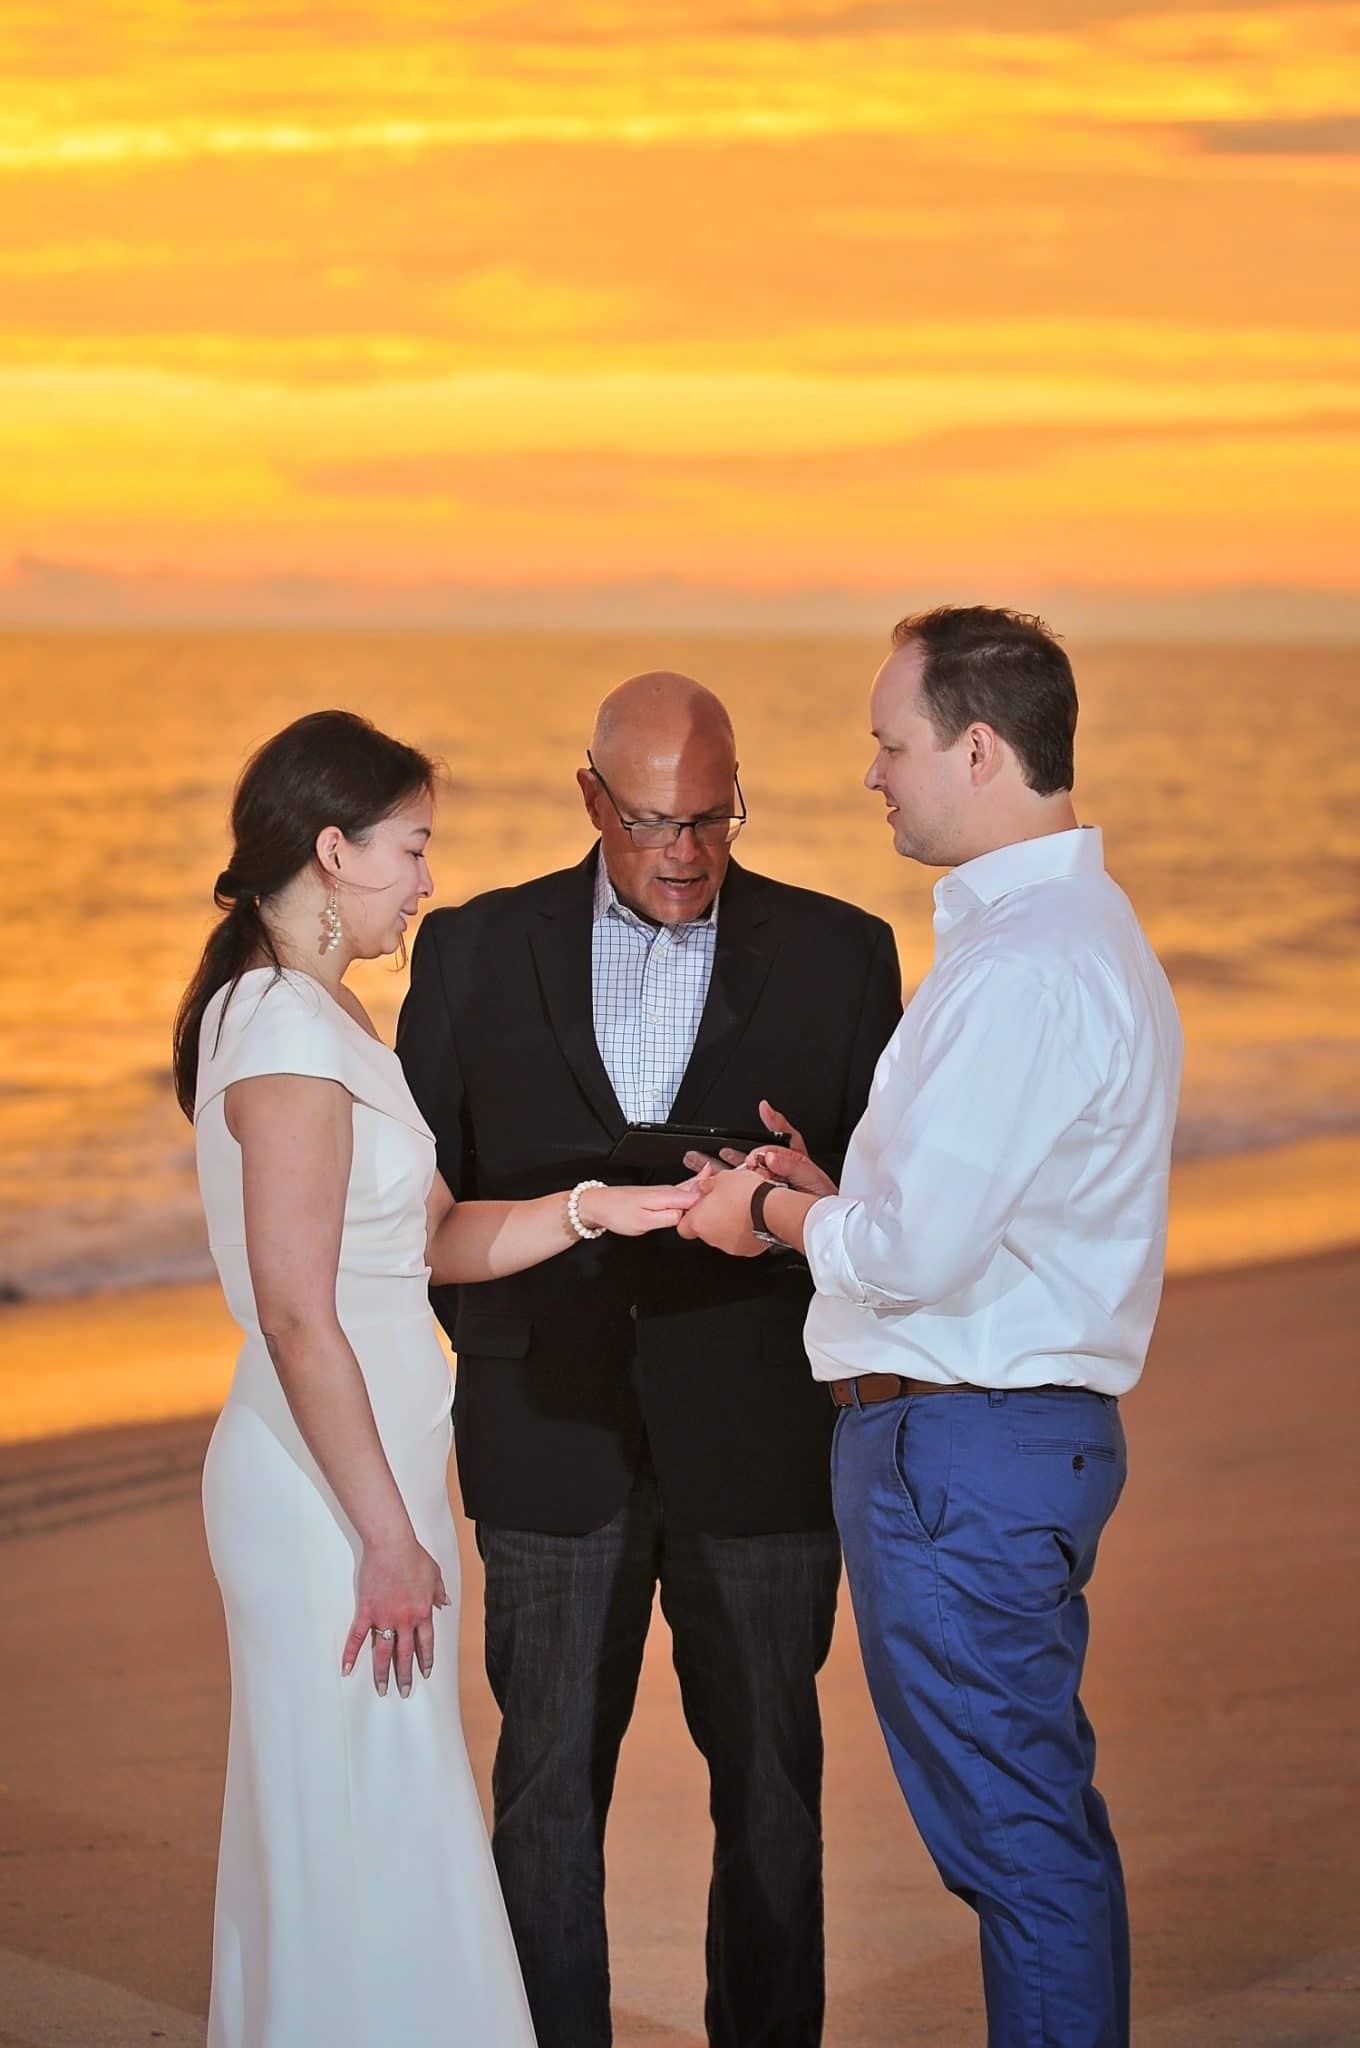 Pastor Mike standing on the beach at sunset with bride and groom